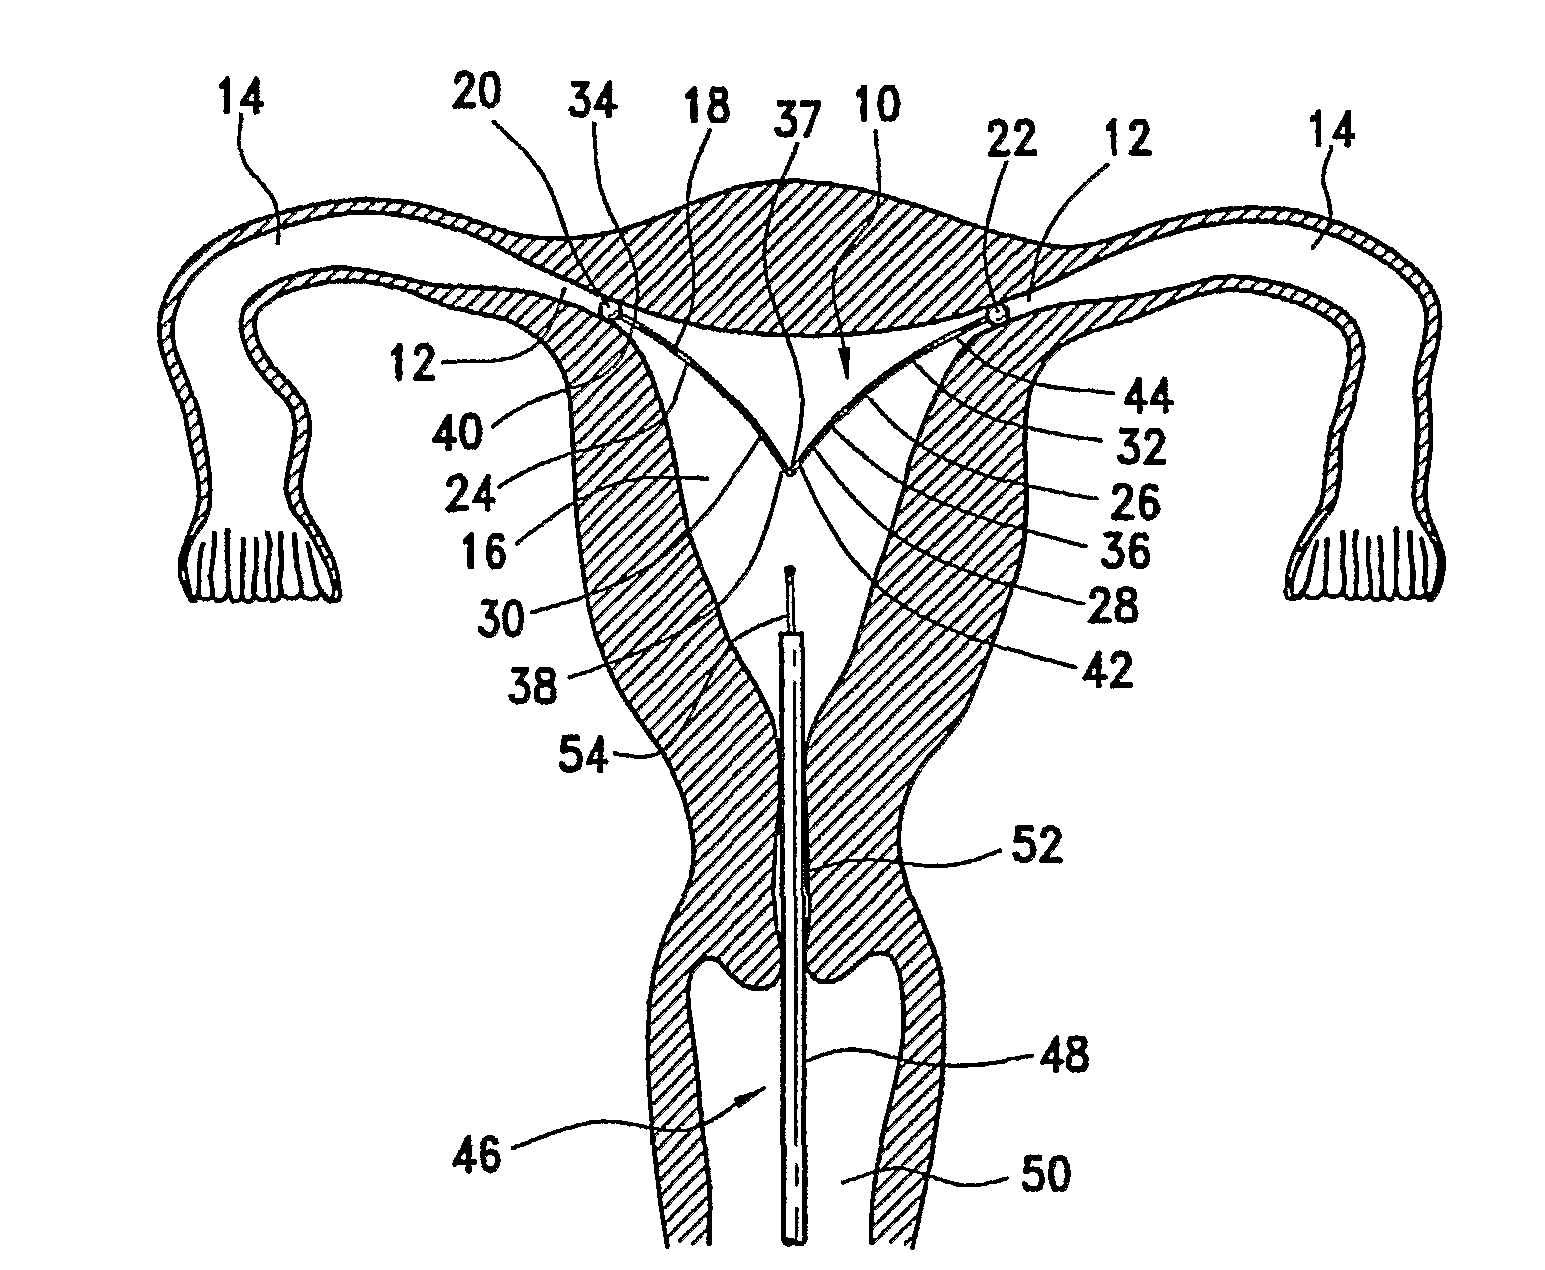 Intrauterine Fallopian Tube Occlusion Device and Method For Use